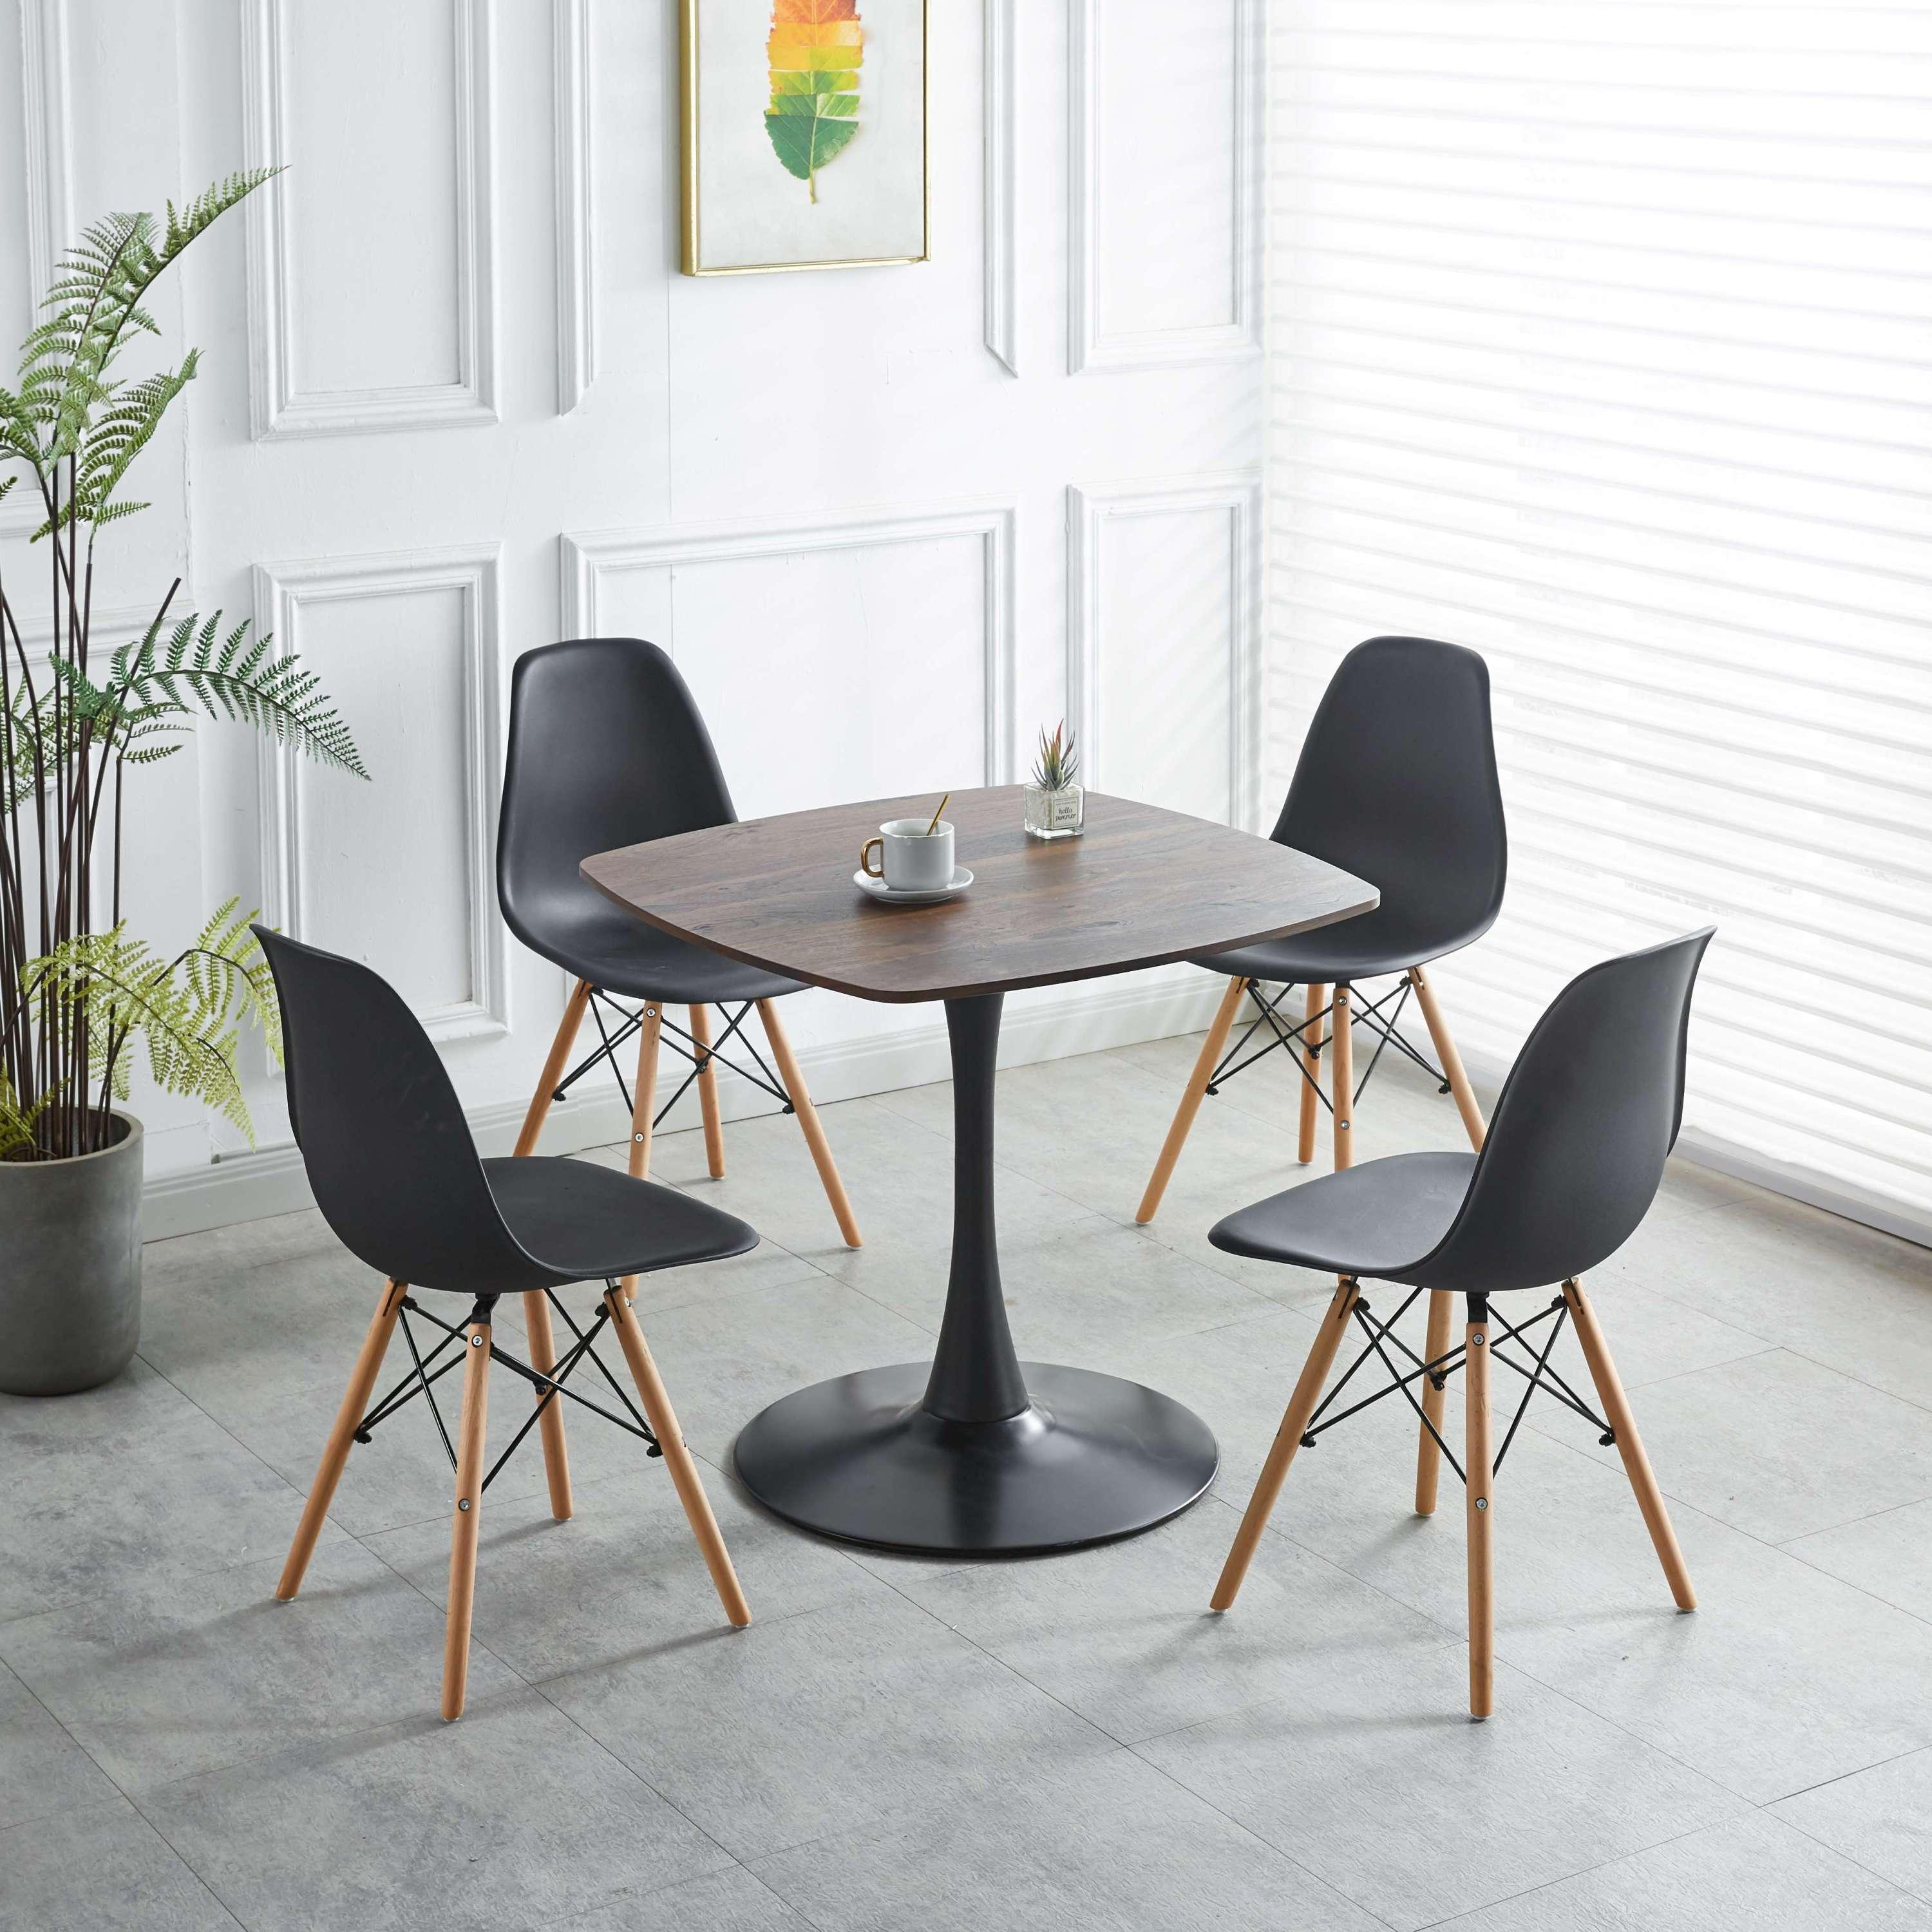 🆓🚛 5 Pcs Dining Set, 1 Square Mid-Century Dining Table With Mdf Table Top, 4 Black Chairs